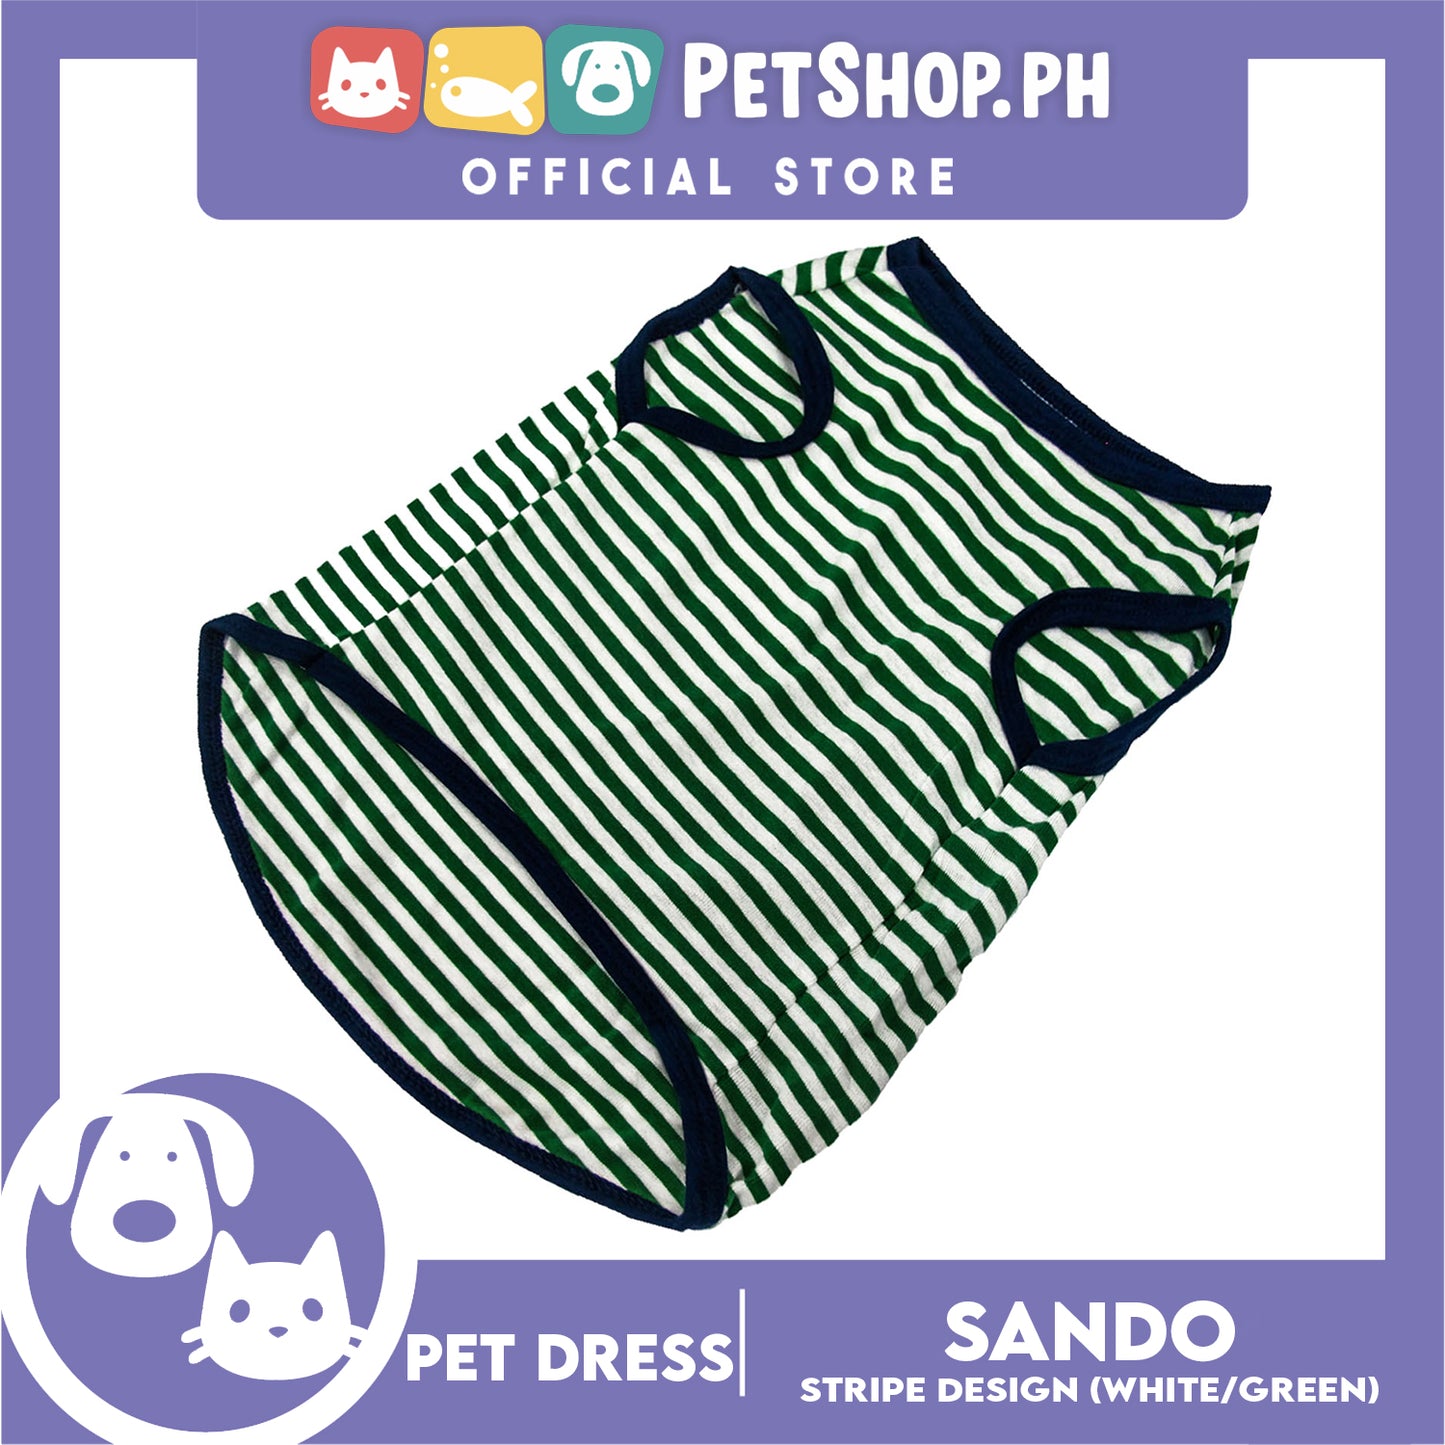 Pet Shirt Stripes (Extra Large) With Blue Piping Sleeveless for Puppy, Small Dog and Cats- Sando Breathable Clothes, Pet T-shirt, Sweatshirt